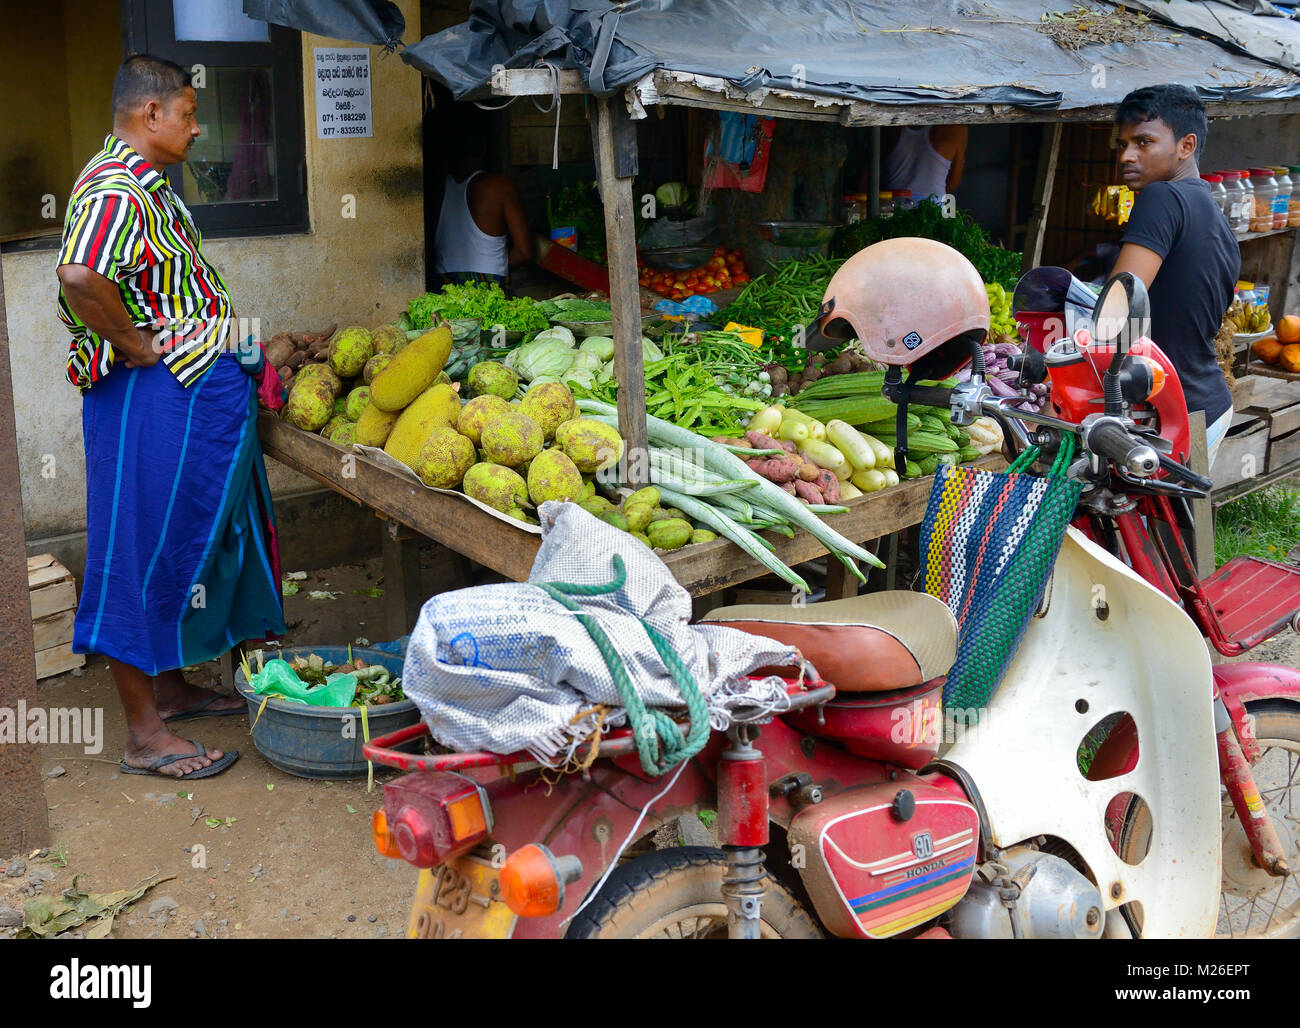 Sri Lanka - November 17, 2015: The buyer and seller about a small fruit shop. Editorial. Stock Photo